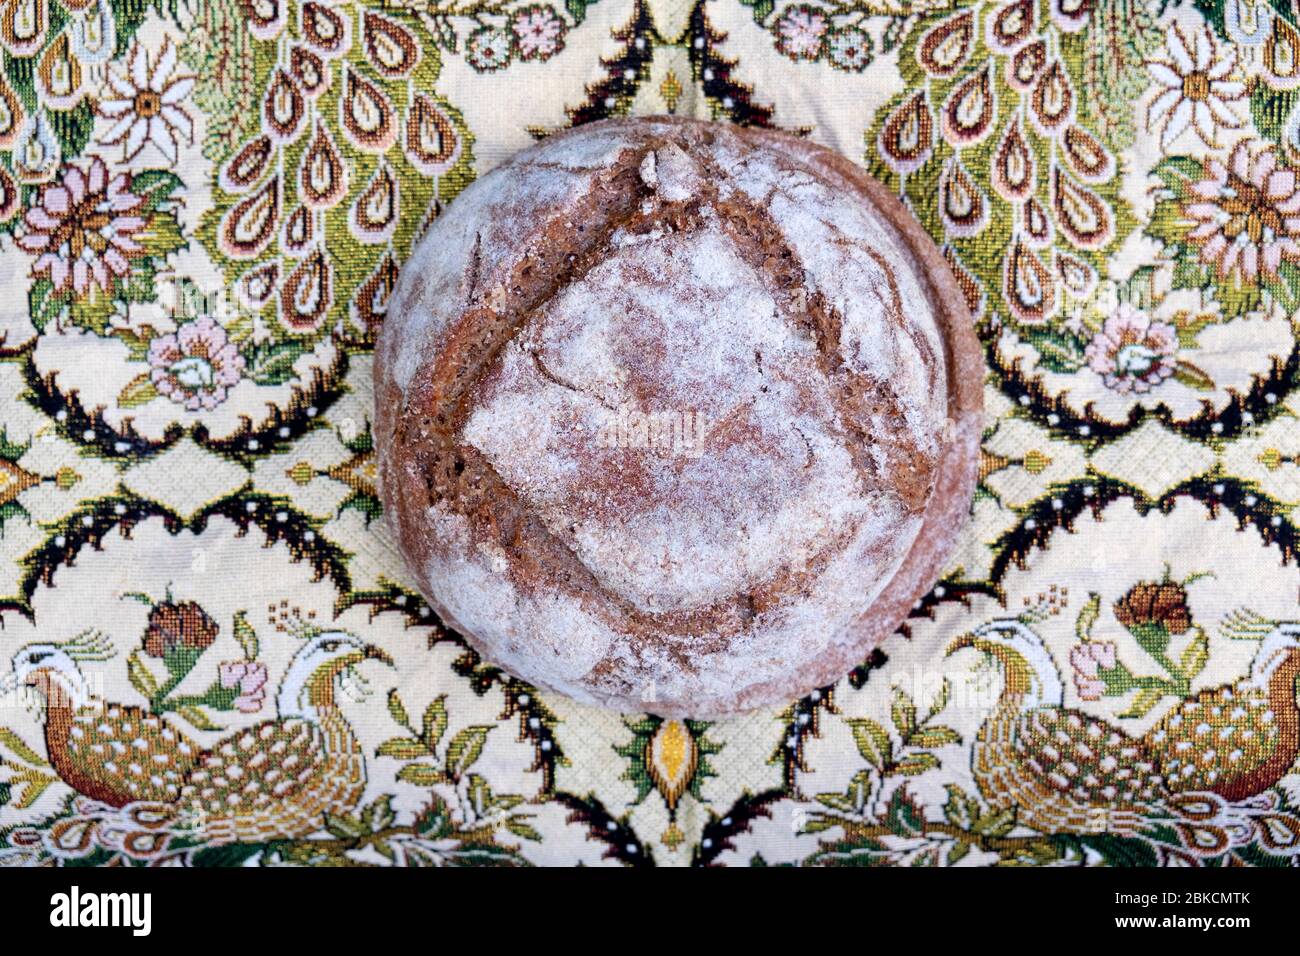 A freshly baked  loaf of rye and wheat homemade sourdough bread viewed from above on a beautiful middle eastern fabric background UK  KATHY DEWITT Stock Photo